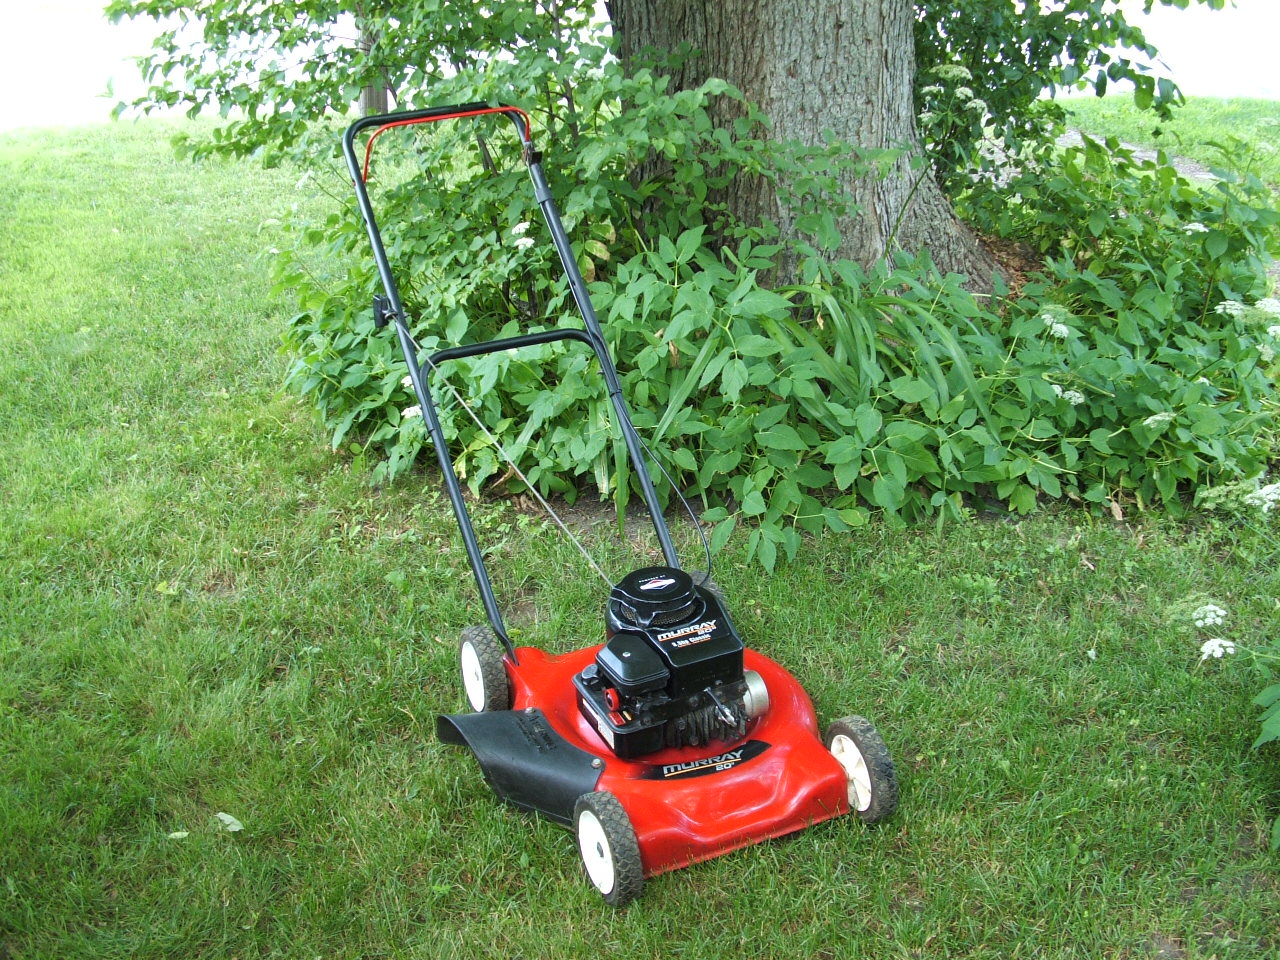 Murray 20" Briggs and Stratton Lawn Mower